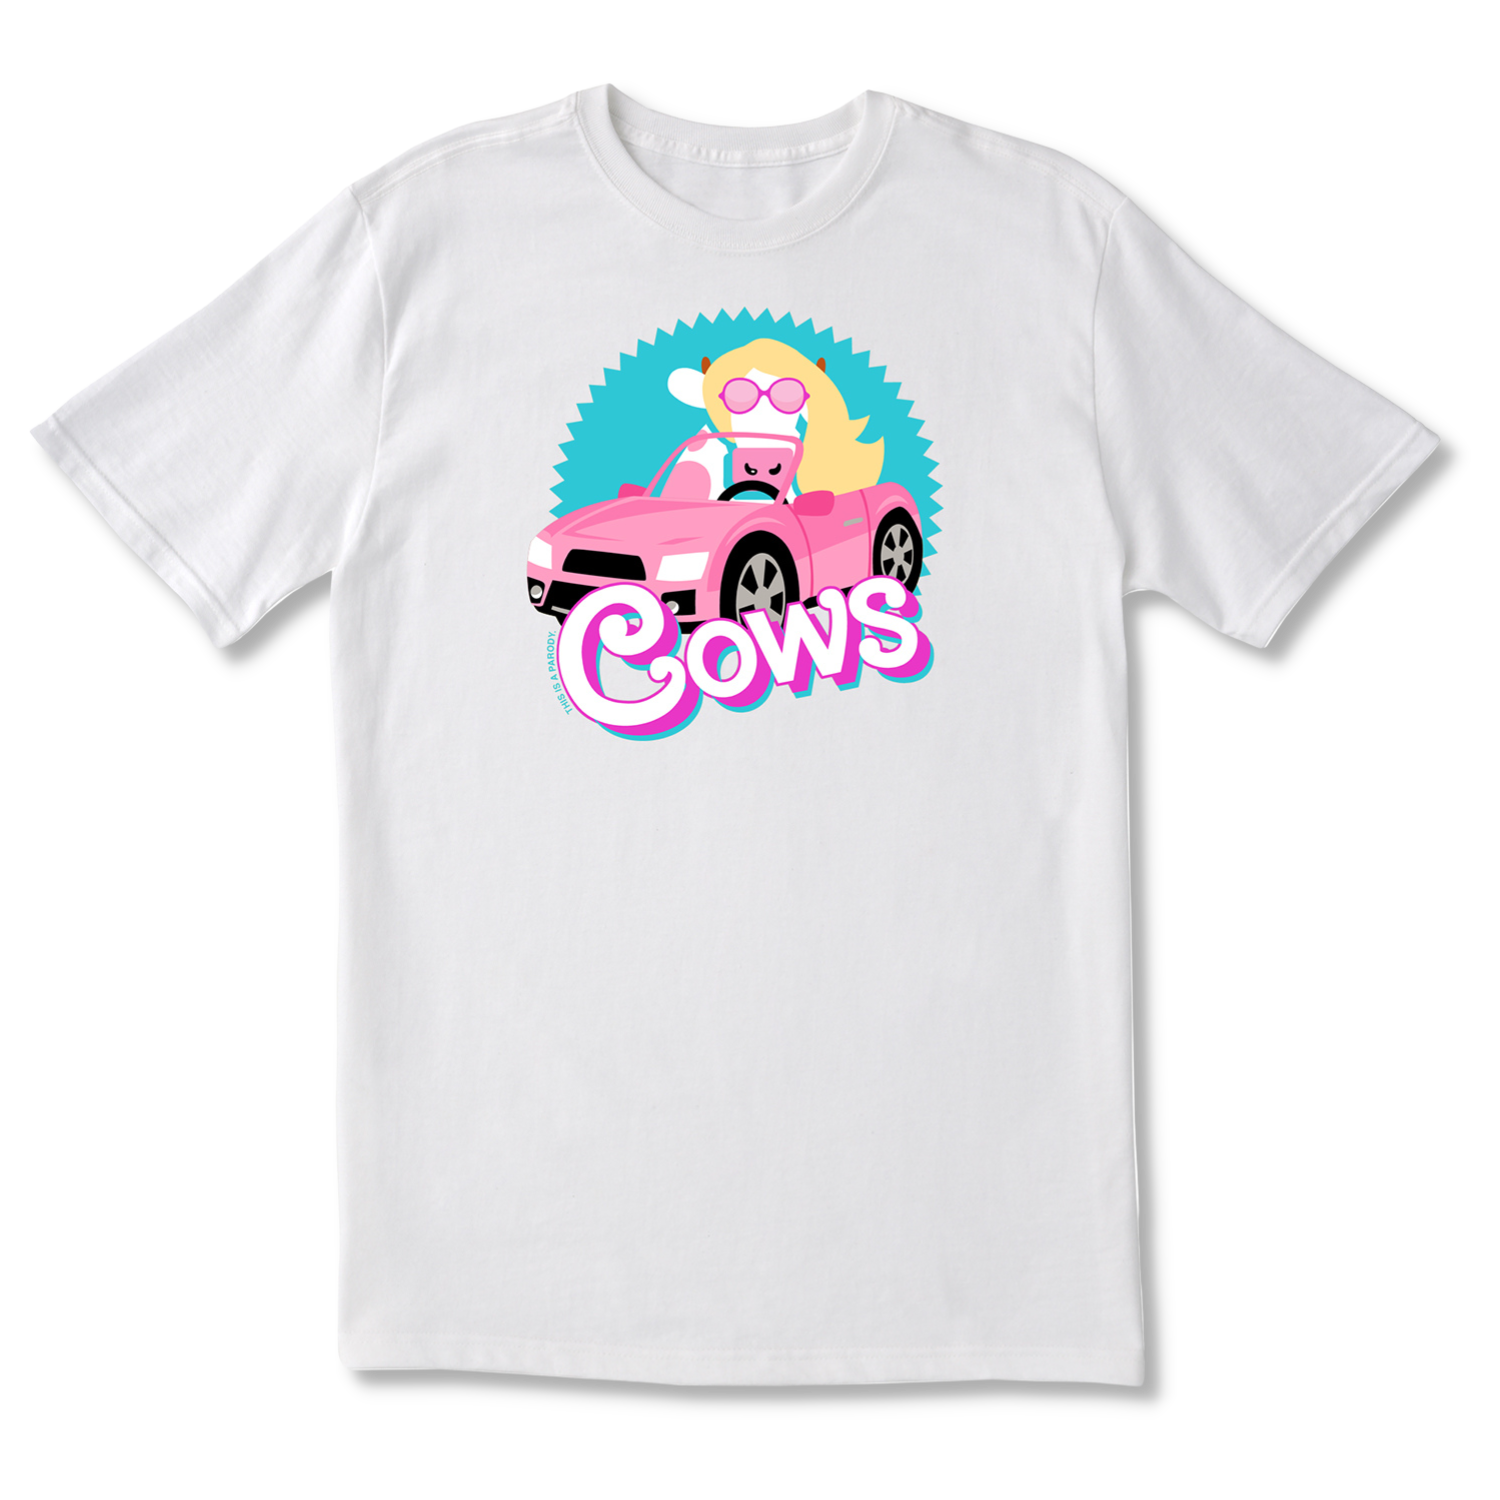 COWS Adult/Youth/Kids T